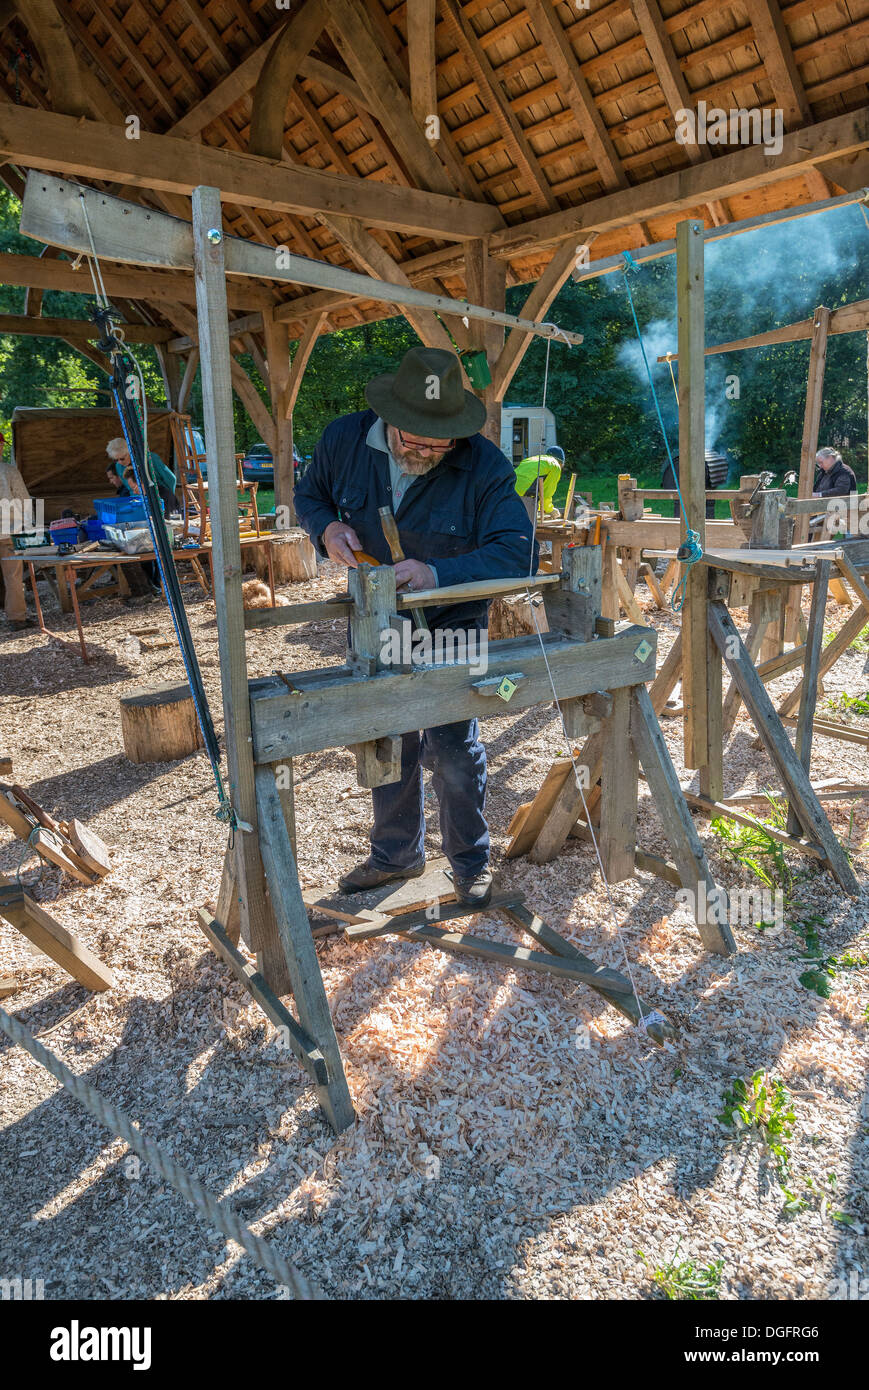 AMATEUR WOODWORKER TURNING WOOD WITH FOOT LATHE ON WOODWORKING COURSE OUTDOORS IN WESTONBIRT GLOUCESTERSHIRE ENGLAND UK Stock Photo